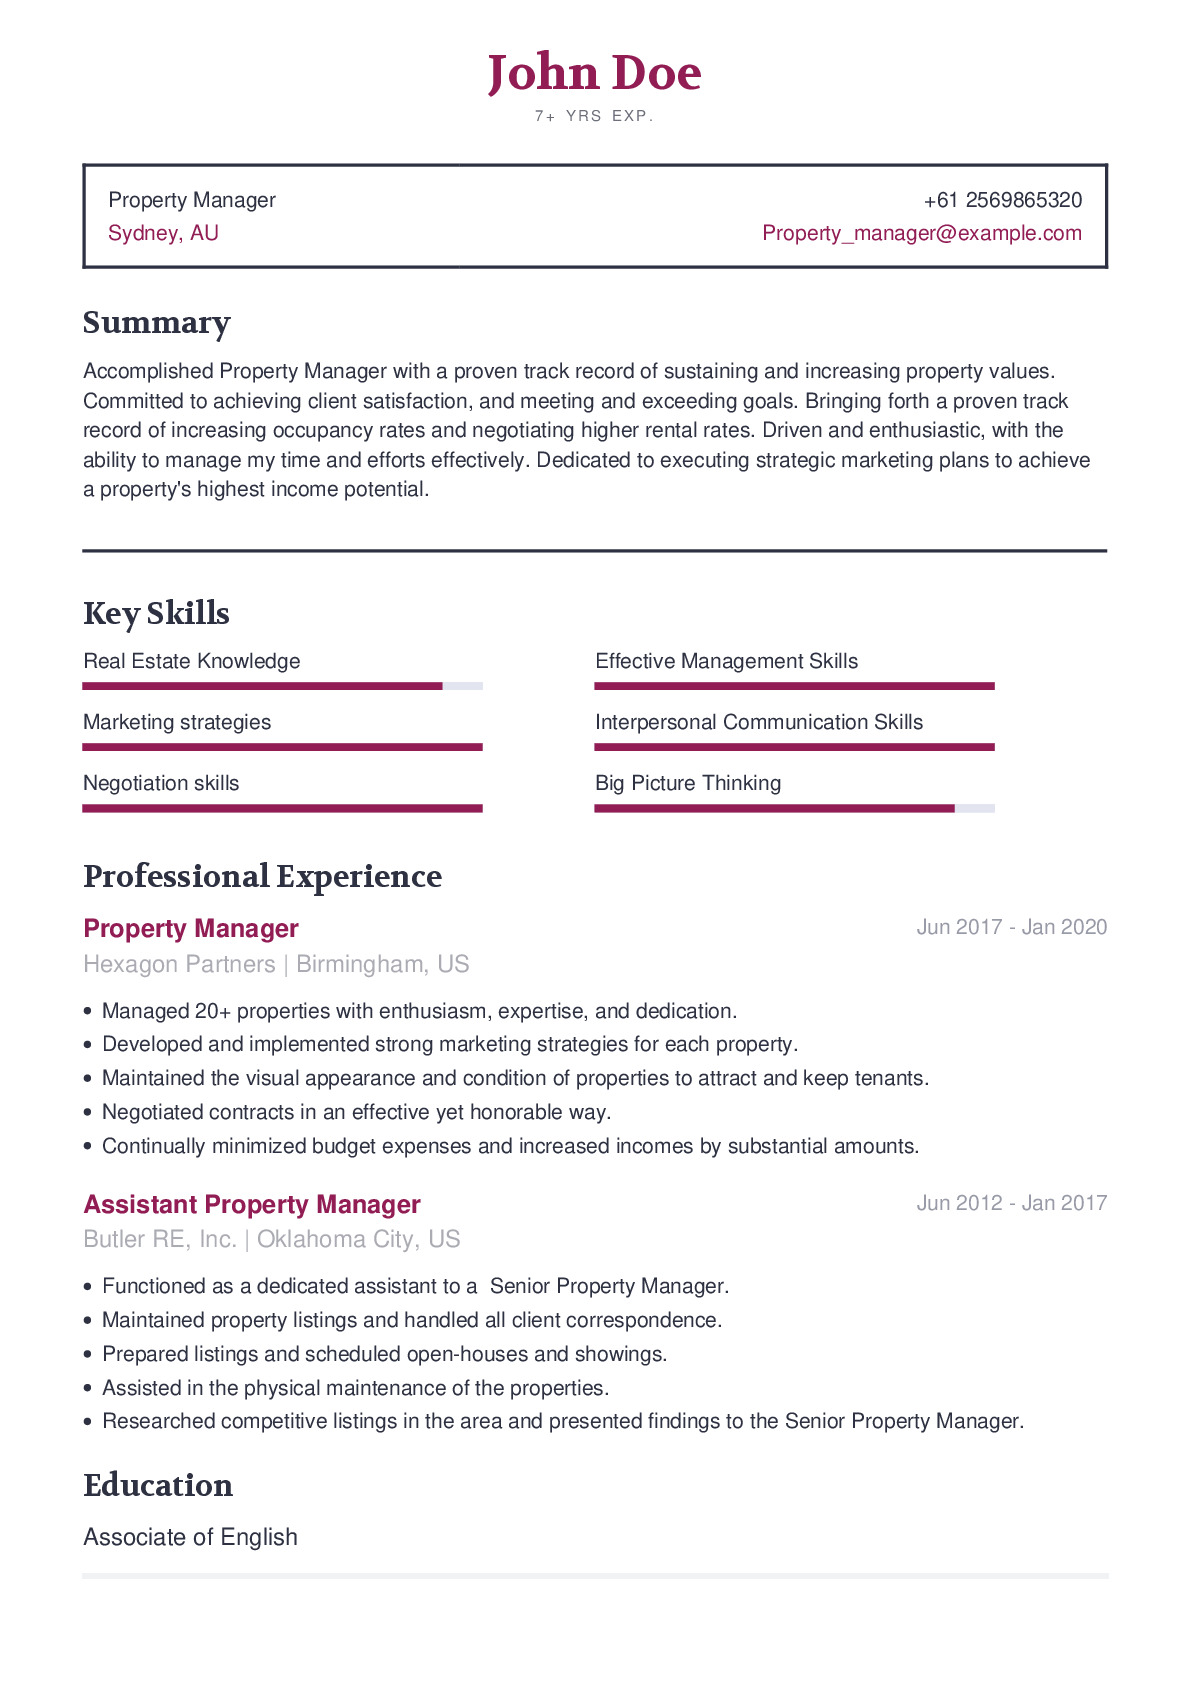 Pre-written Resume Examples for Real Estate 2020 | CraftmyCV